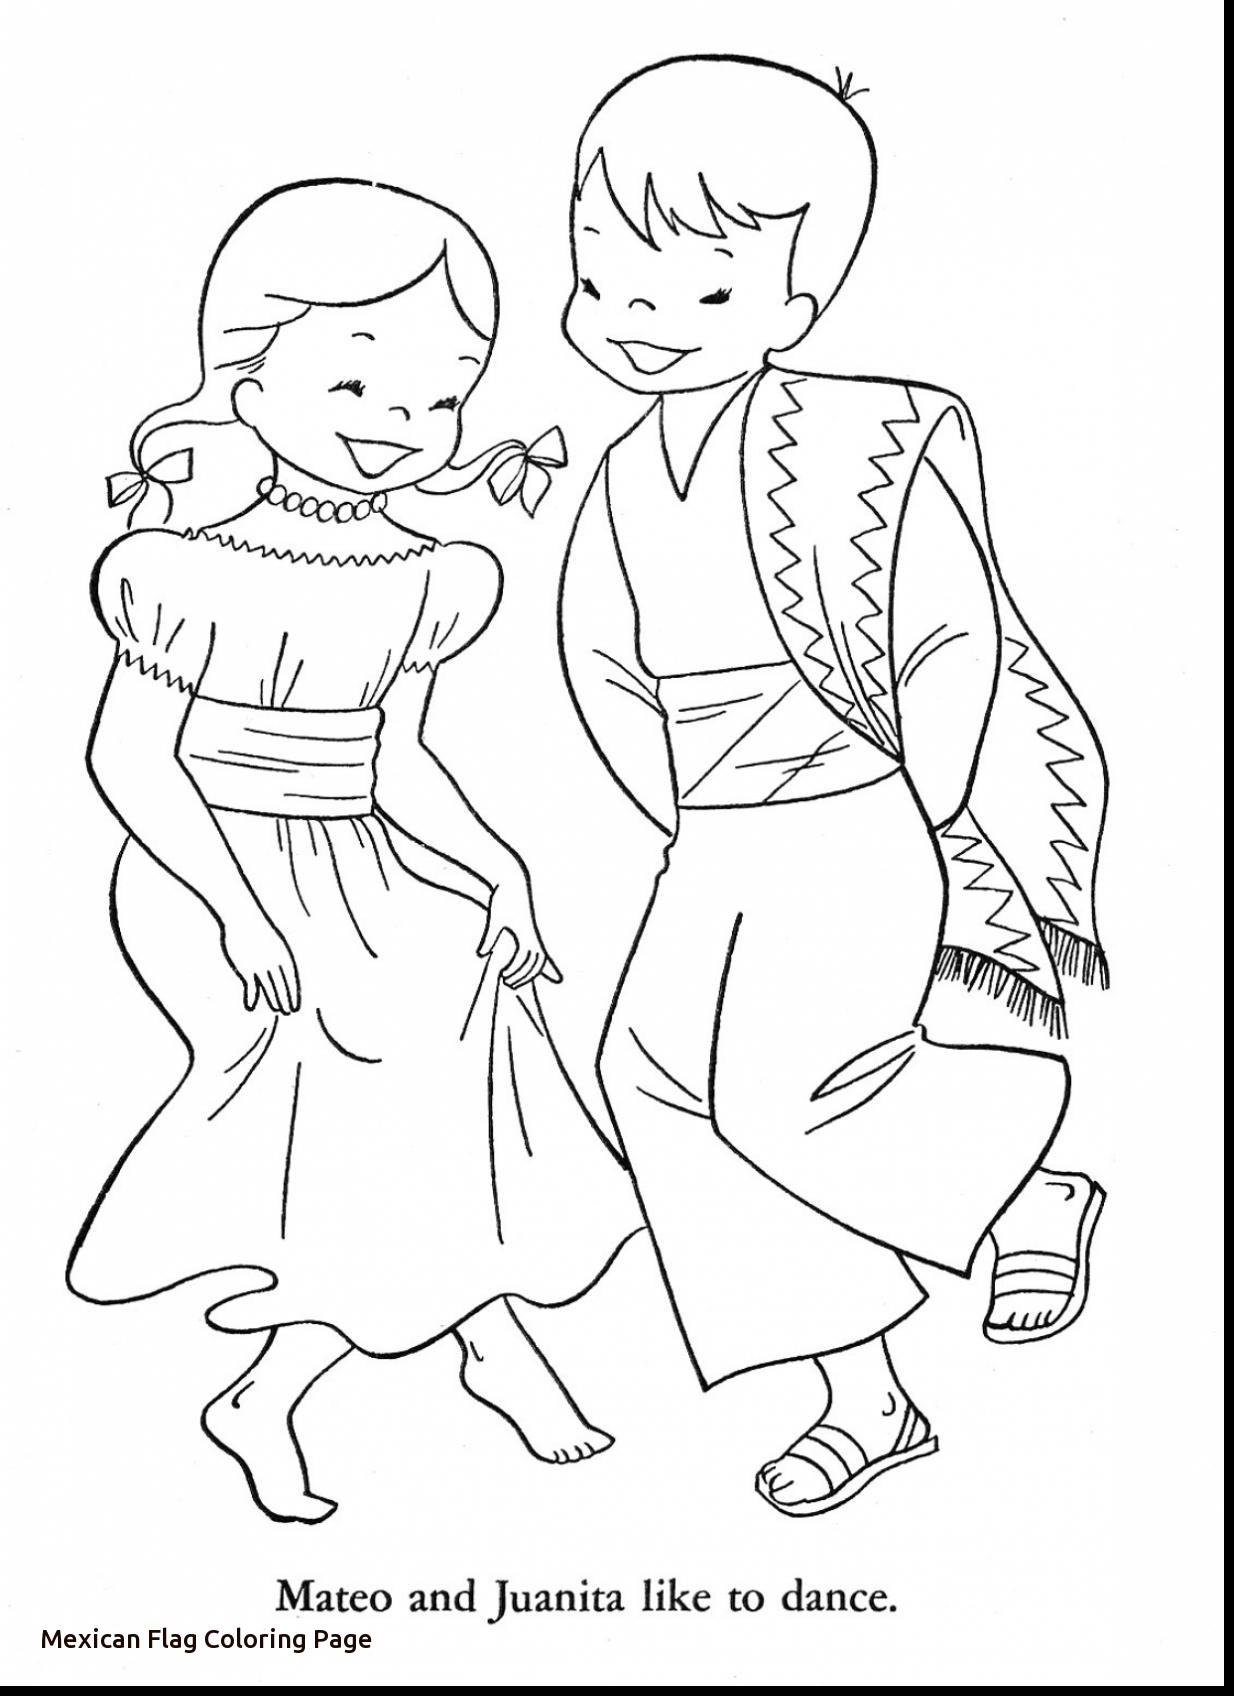 Pakistan Coloring Pages at GetColorings.com | Free printable colorings ...